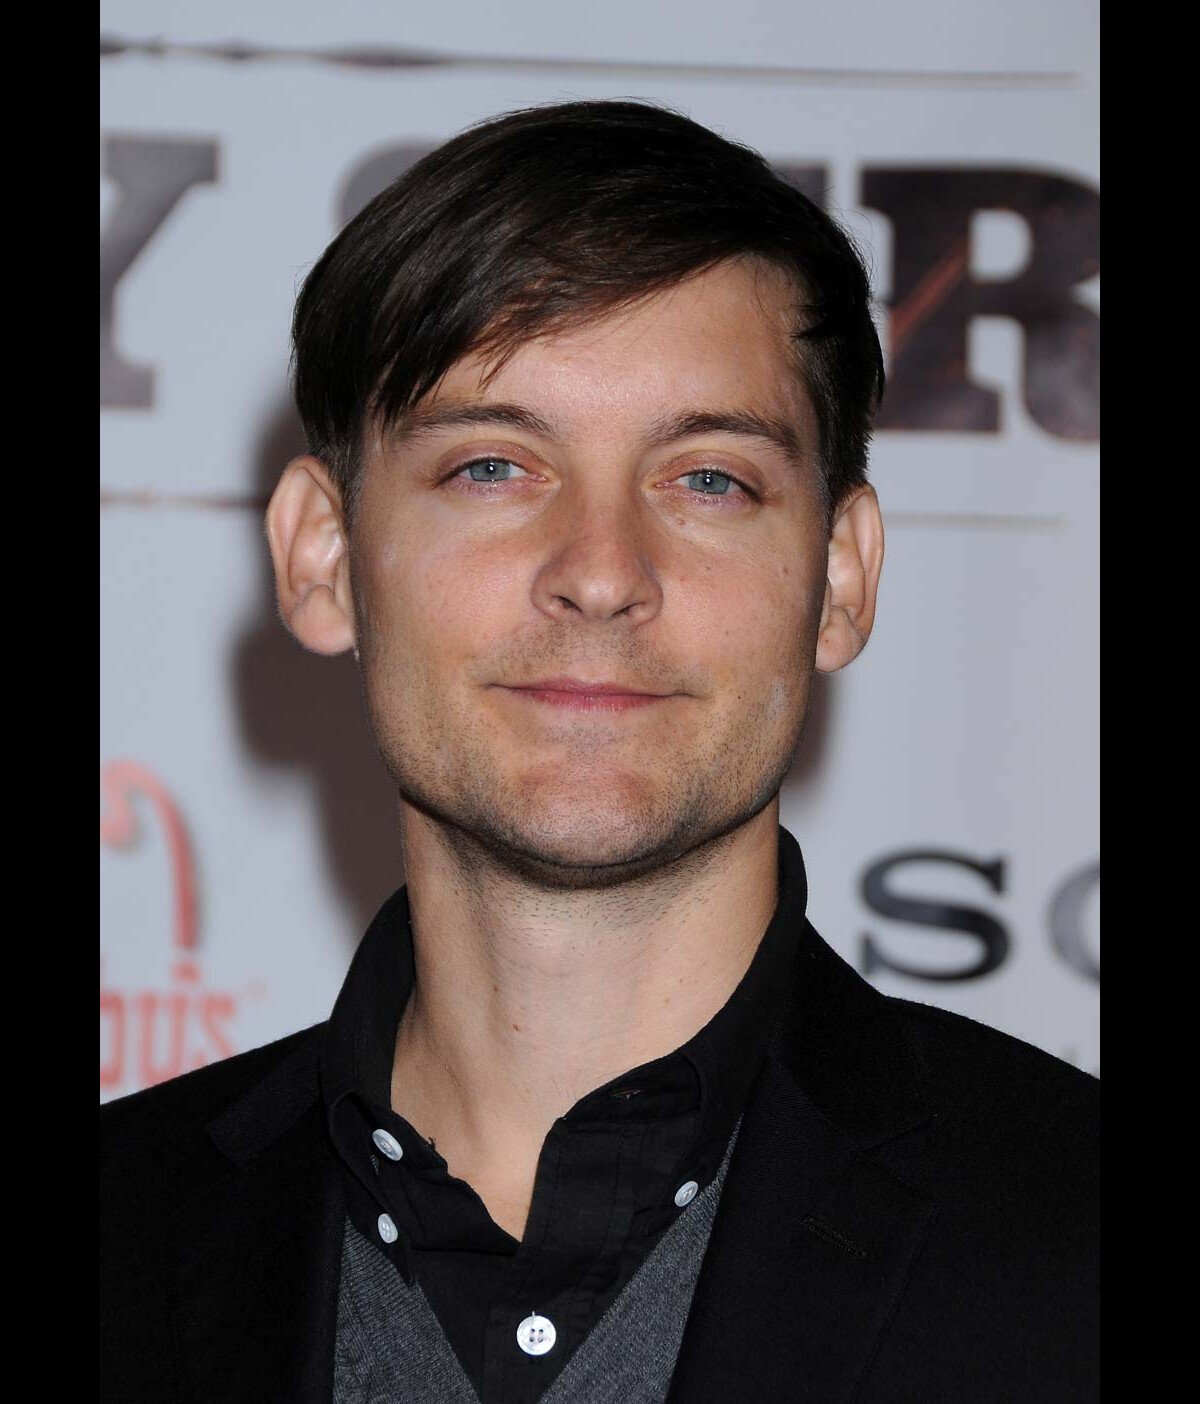 Tobey Maguire Bio, Age, Height, Birthday, Family and More